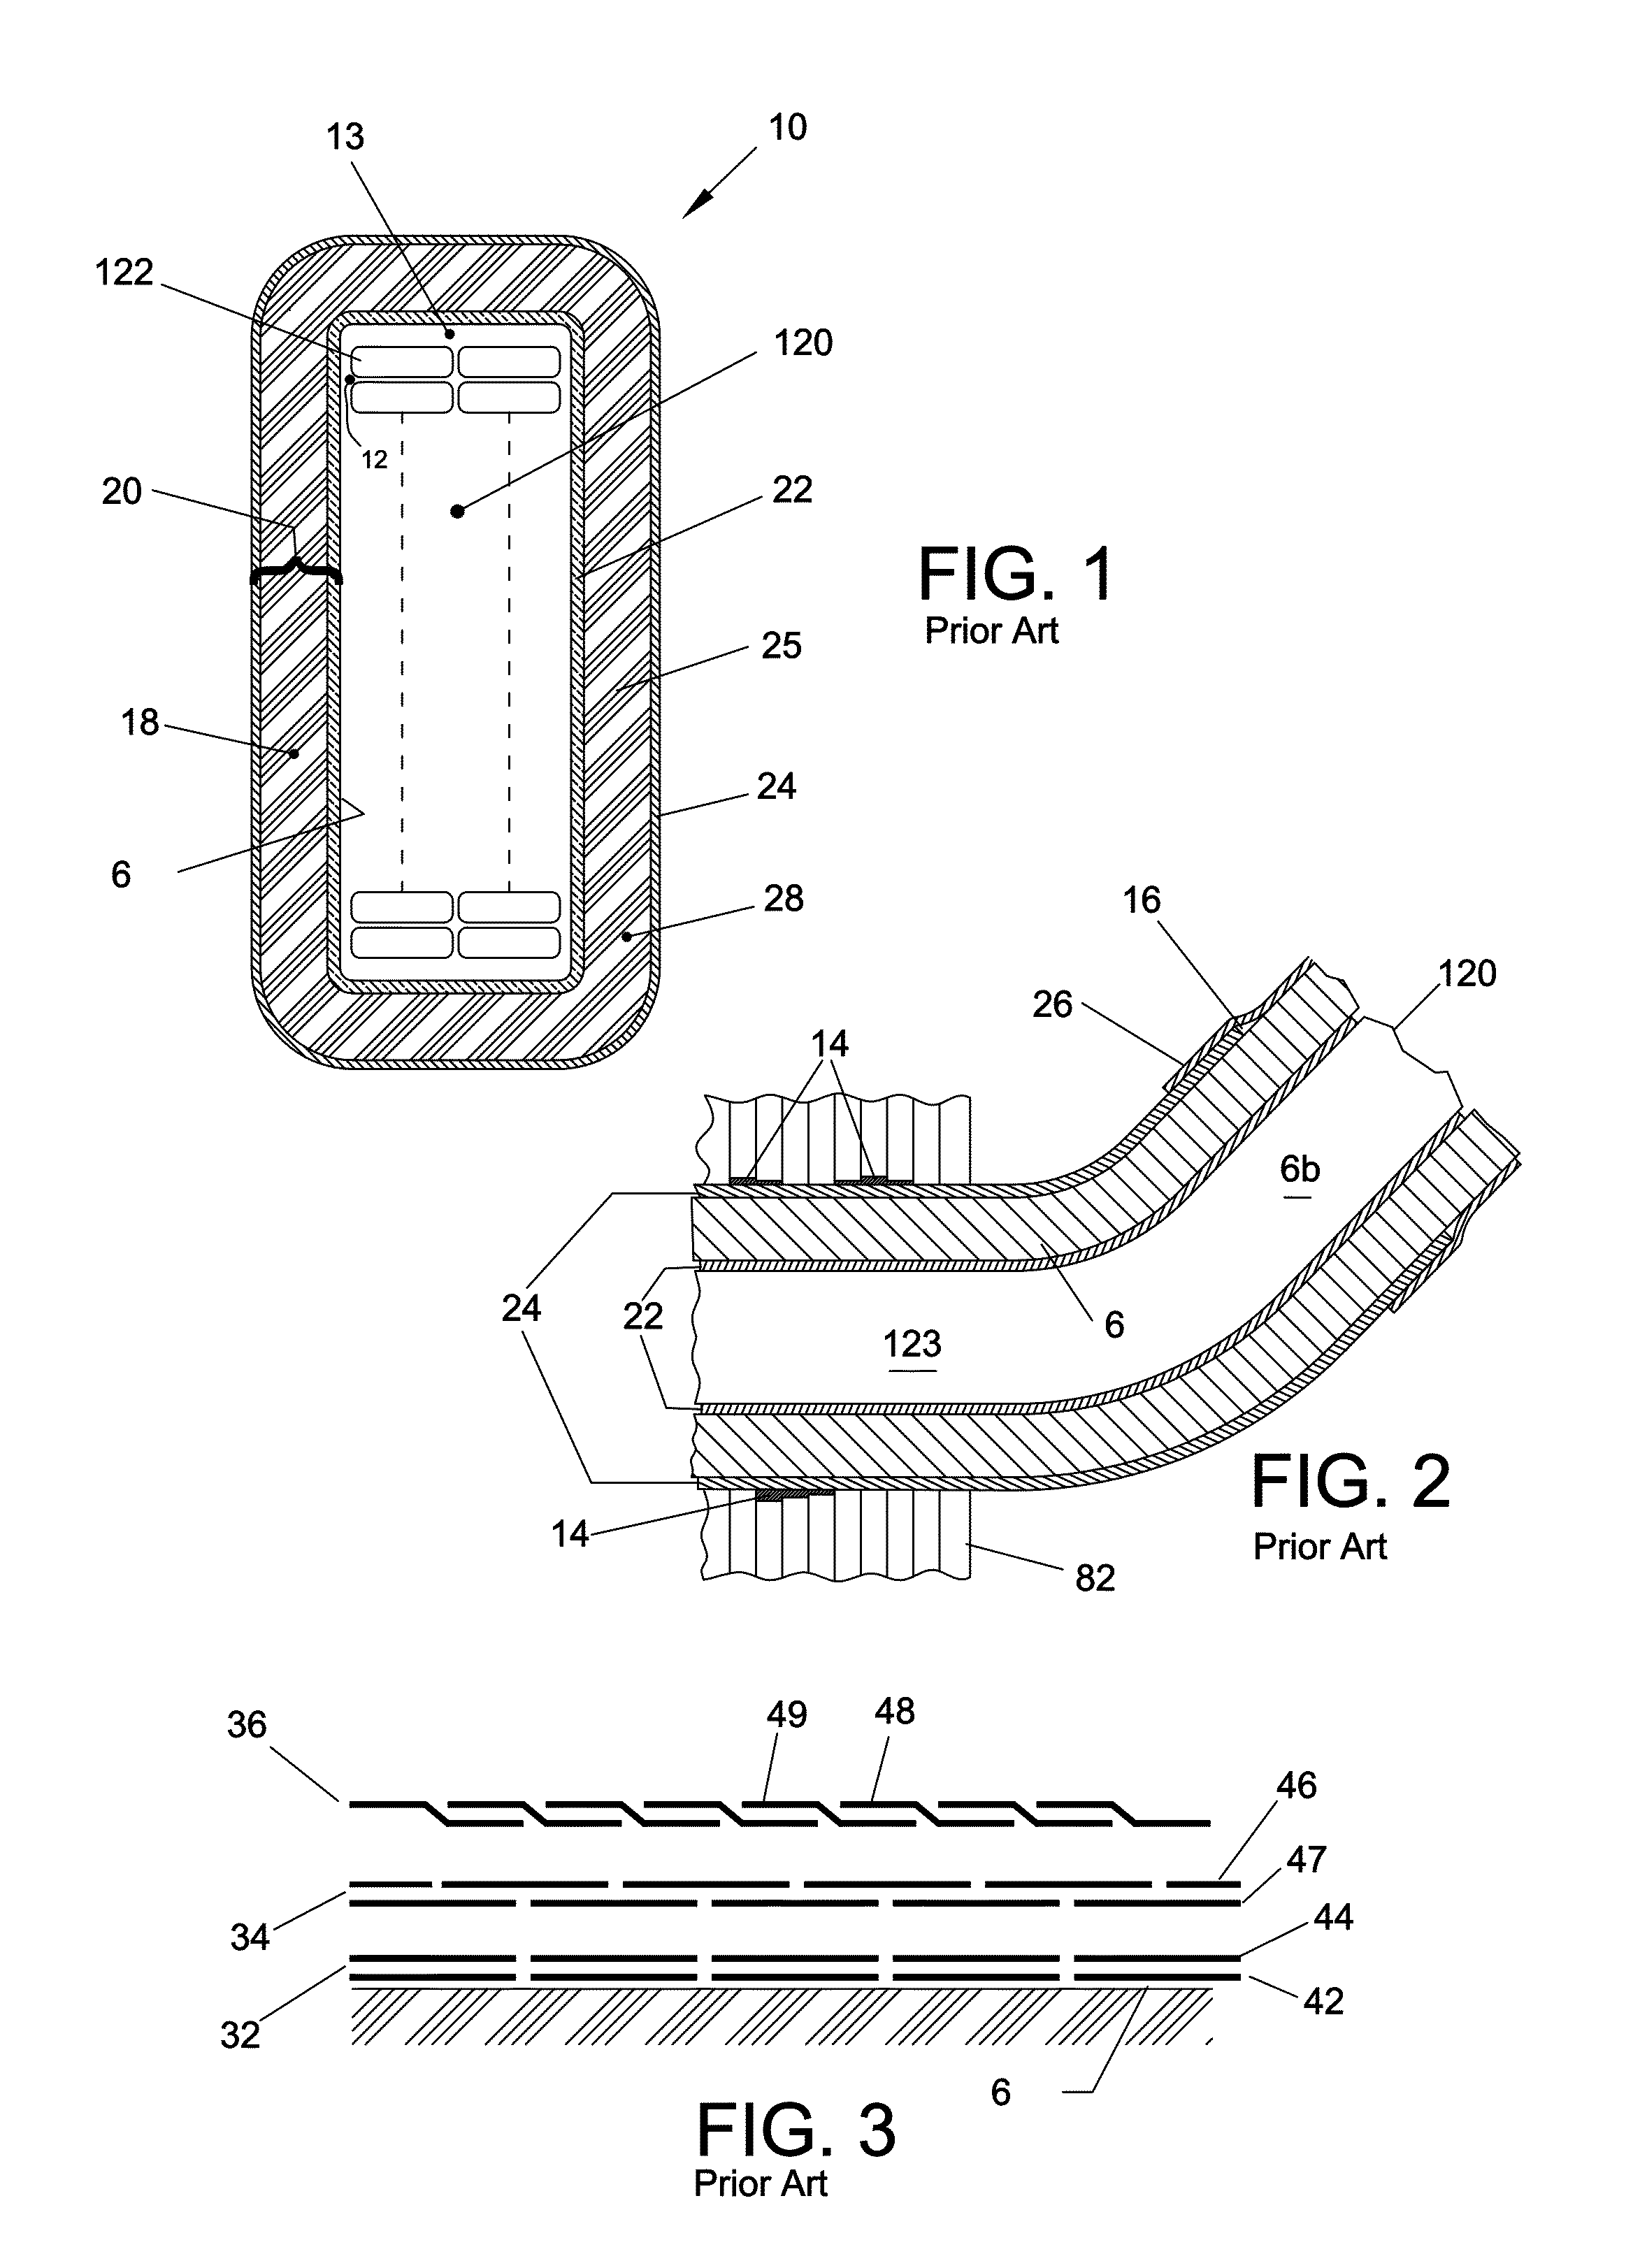 Insulation system for a stator bar with low partial discharge